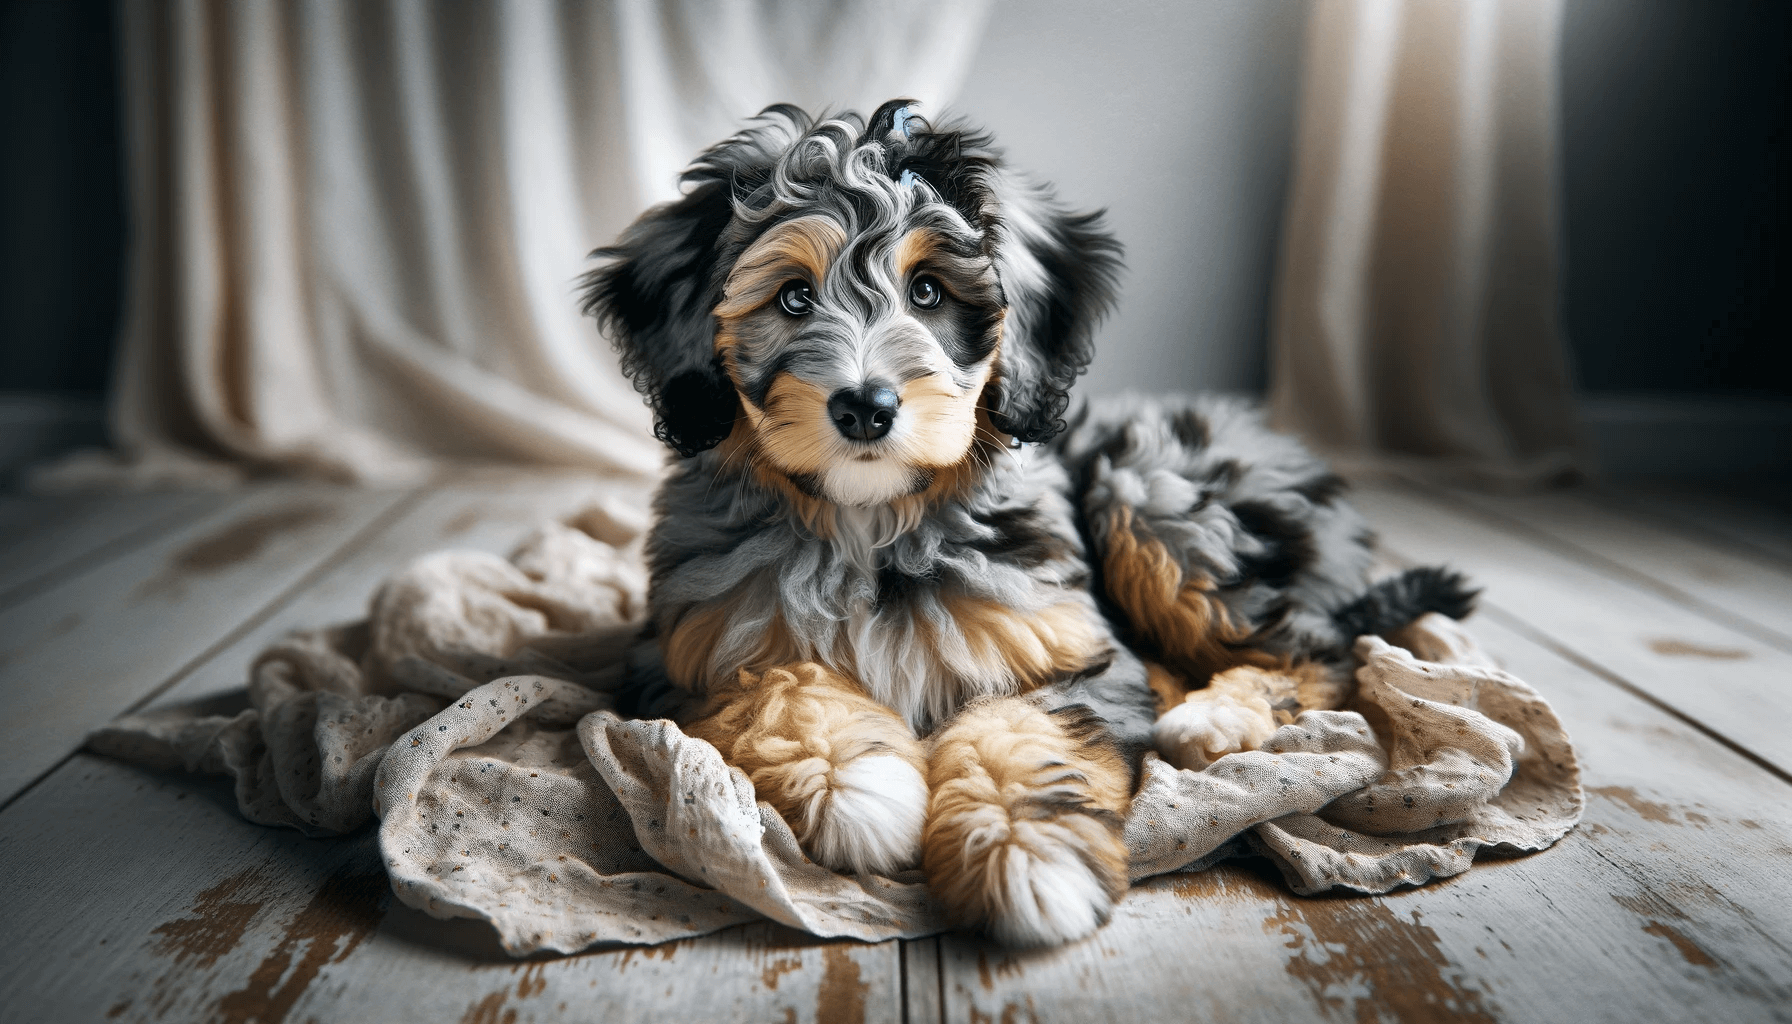 Merle Aussiedoodle lounging on a cloth with a merle-patterned coat and curious eyes that capture the affectionate and inquisitive nature.